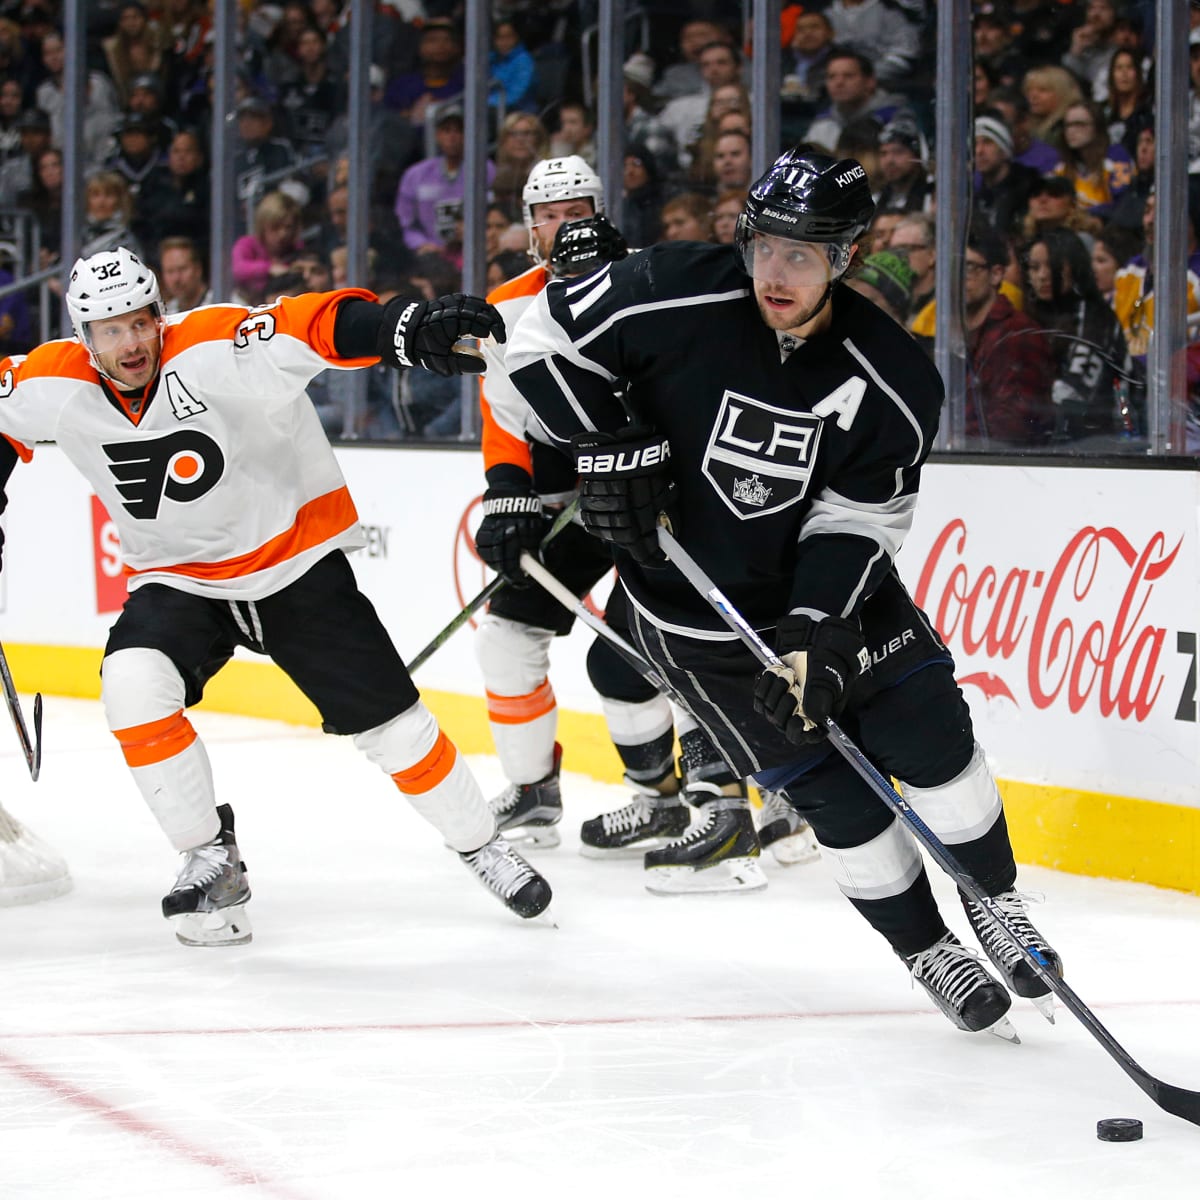 NHL free agency: Drew Doughty, Kings sign 8-year extension - Sports  Illustrated